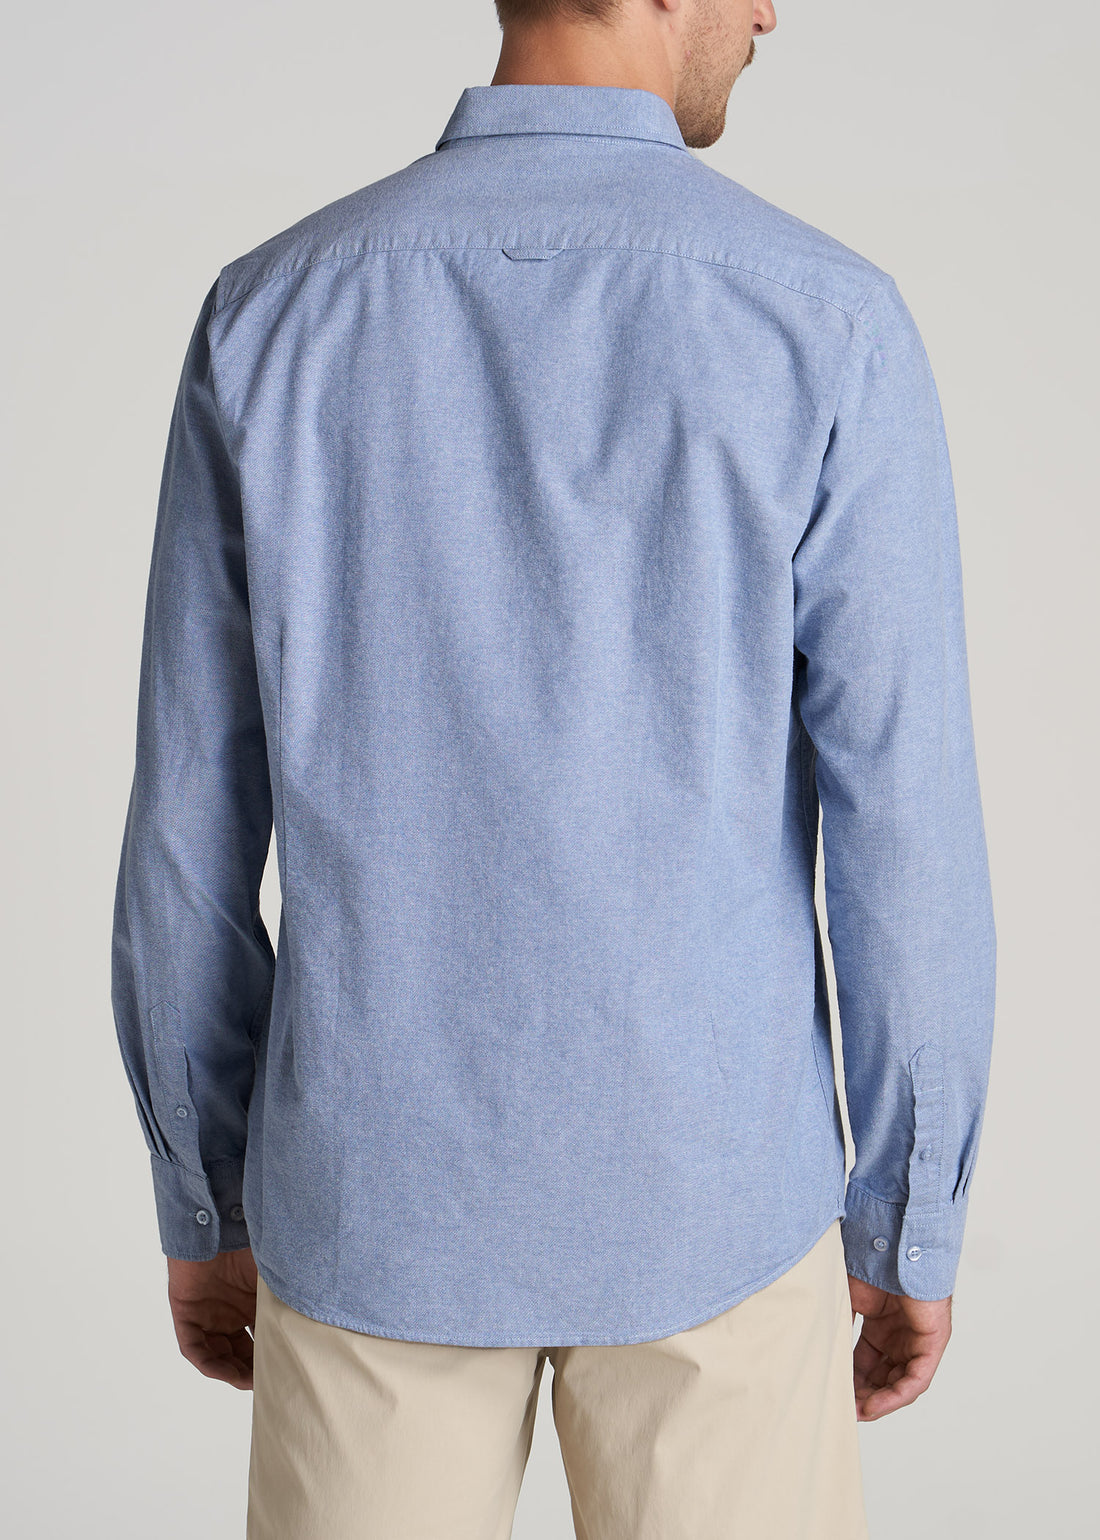 Washed Oxford Shirt For Tall Men Dark Sky Blue | American Tall